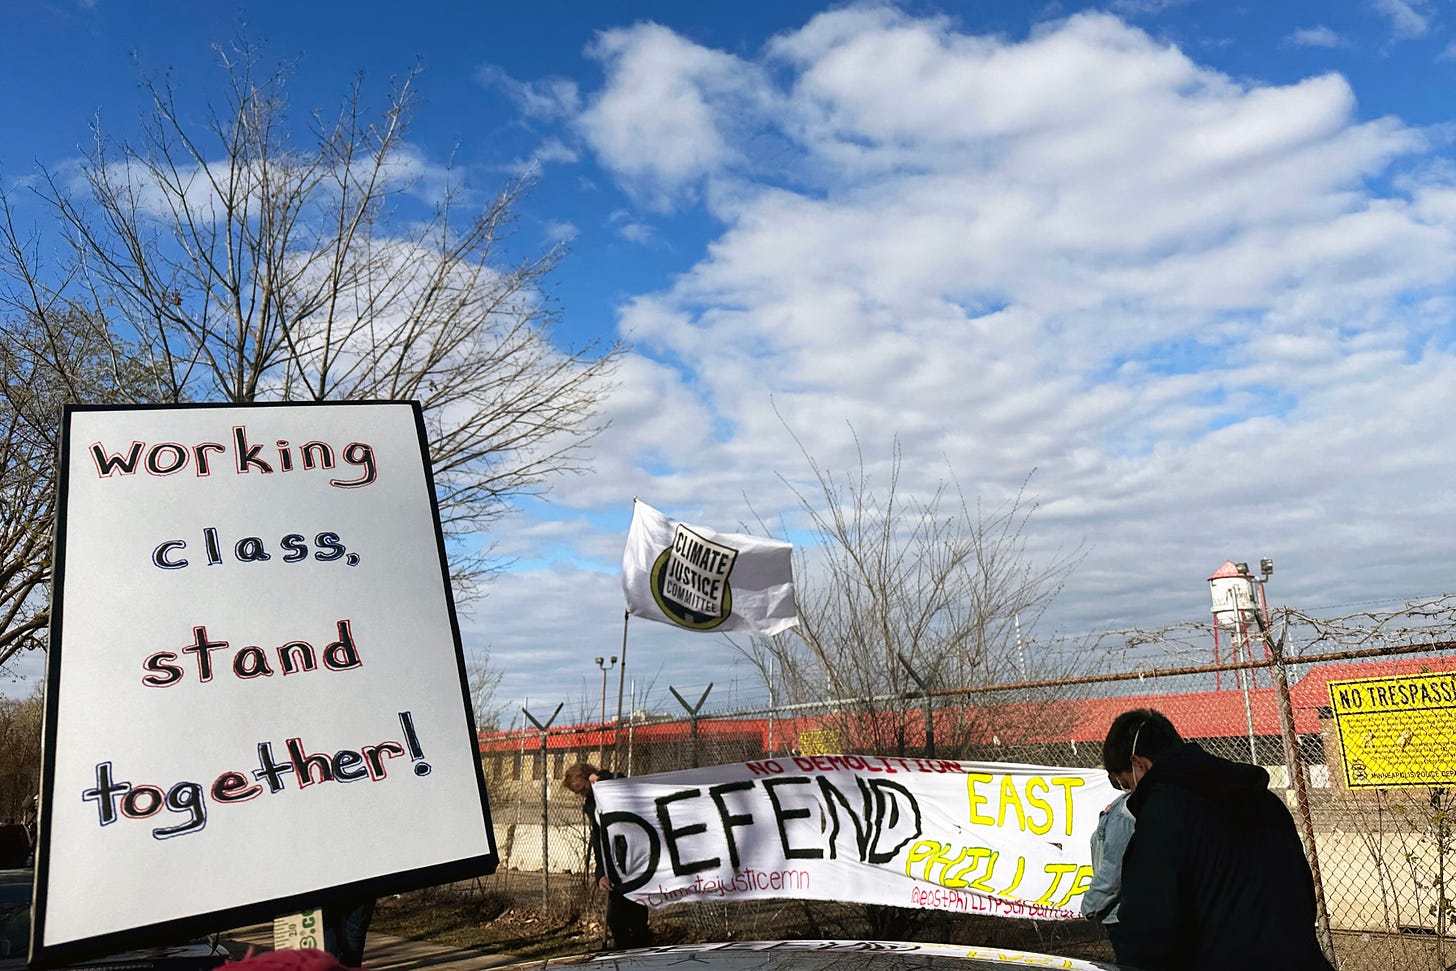 on the left, a white poster with black writing and red and blue outlines reads "working class, stand together!" in the background people hold up a white banner with red and black and yellow words reading "DEFEND EAST PHILLIPS" "no demolition" a flag flies in the background reading 'Climate justice committee" and the Roof Depot building and water tower in the background behind a tall barbed fence with a yellow no trespassing sign